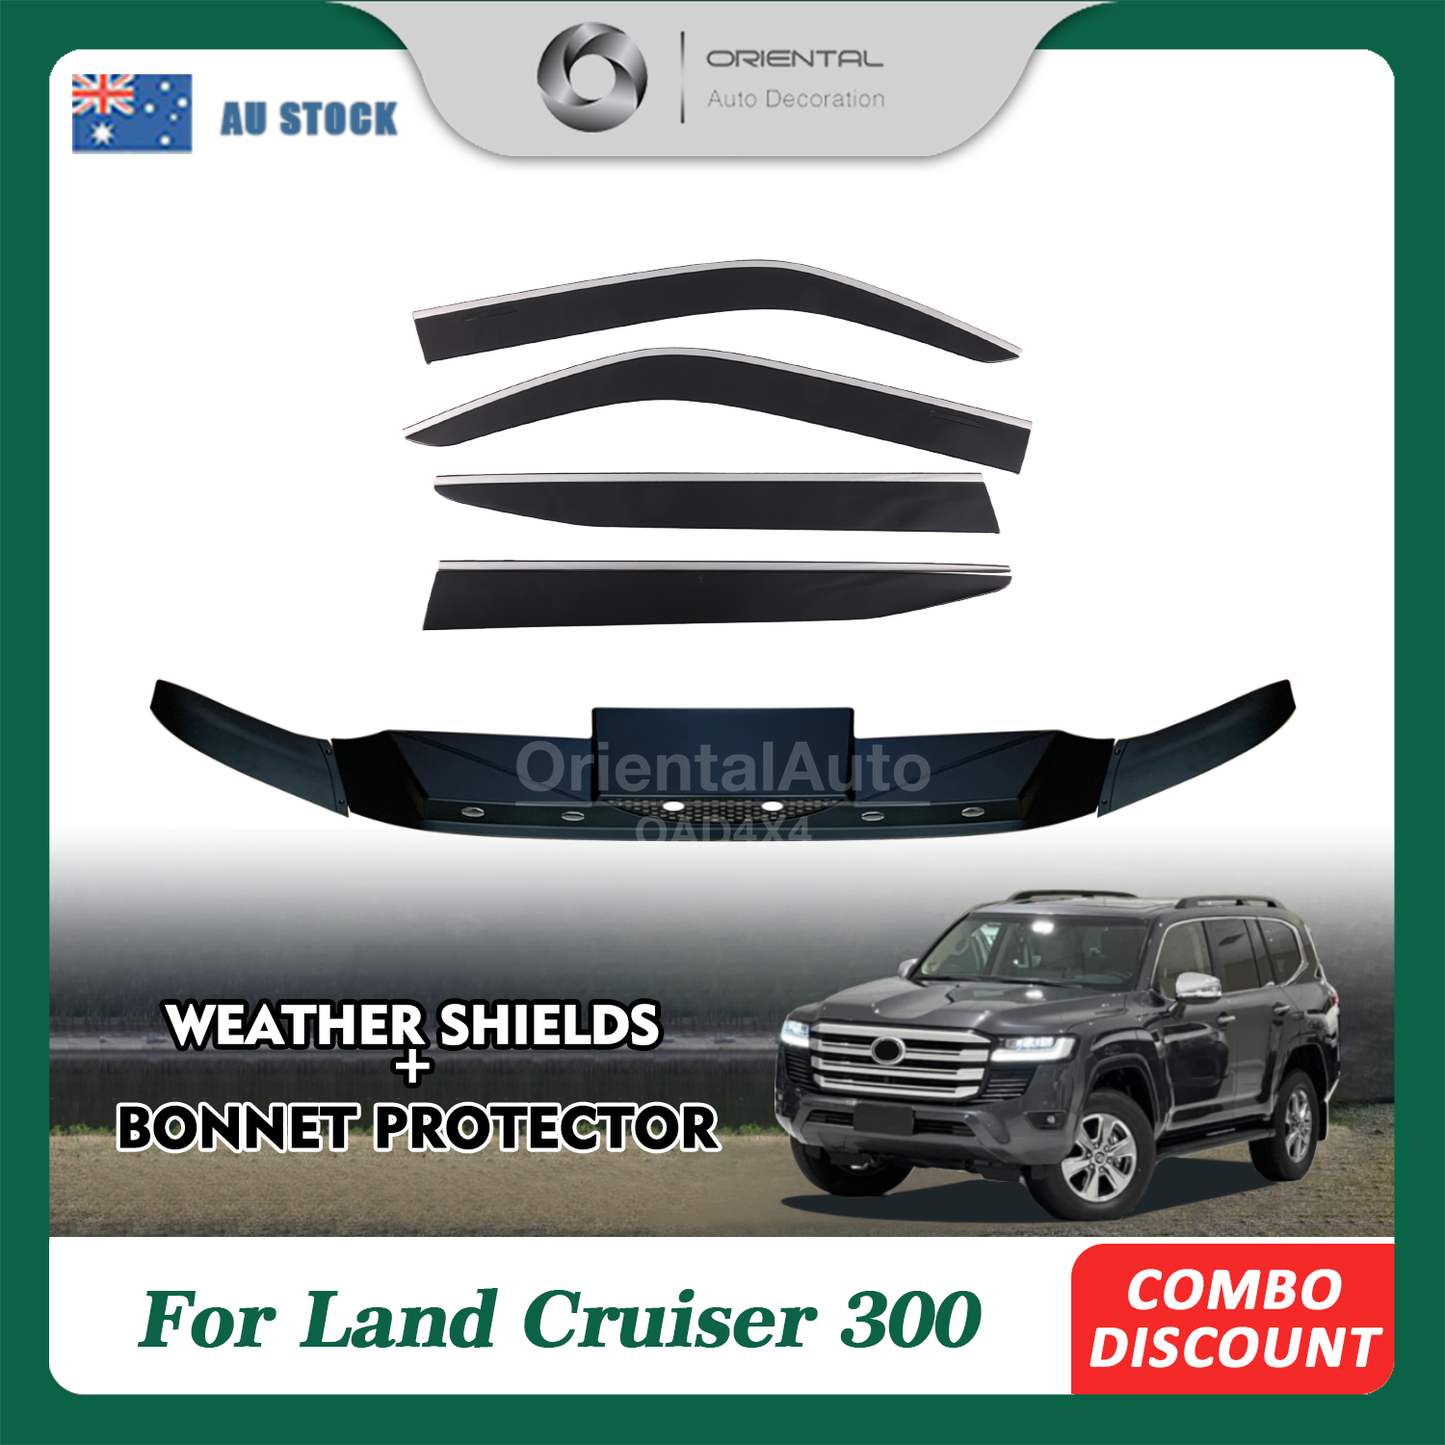 Injection Bonnet Protector & Injection Stainless Weathershields for Toyota Landcruiser 300 Land cruiser 300 LC300 2021+ Weather Shields Window Visor Hood Protector Bonnet Guard